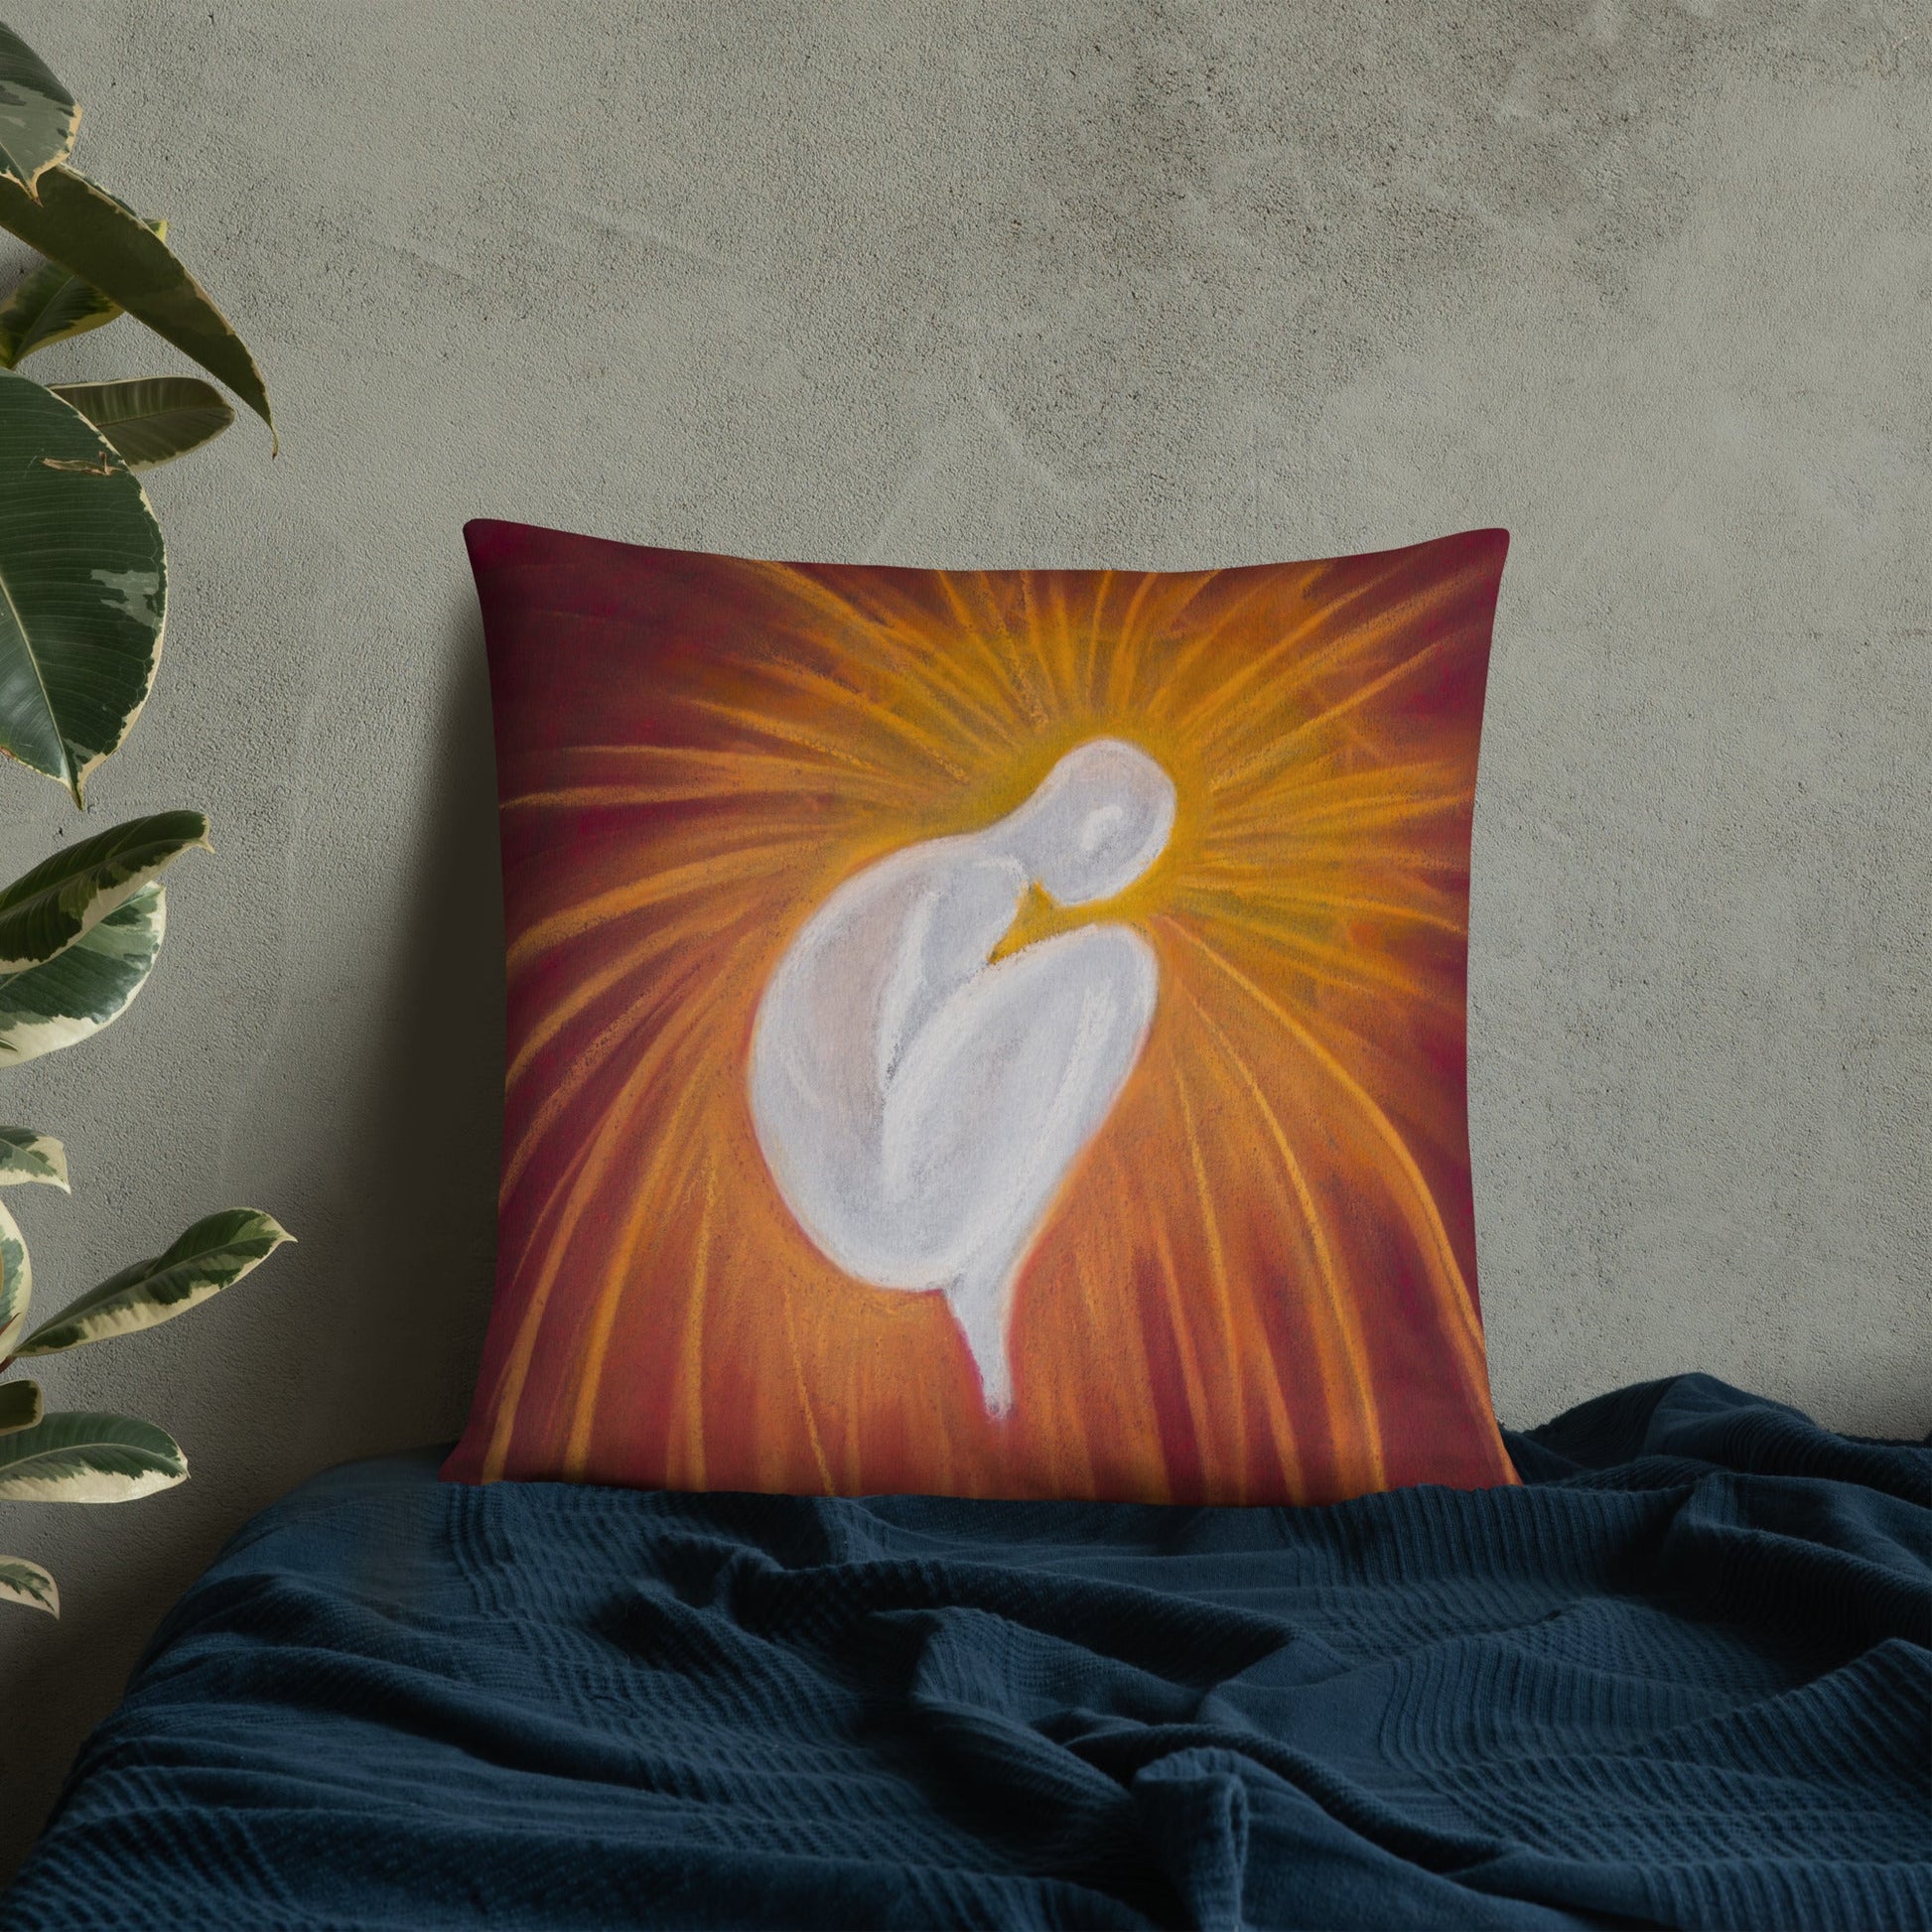 REBIRTH - Cushion - 2 Sizes available - Christel Mesey Art